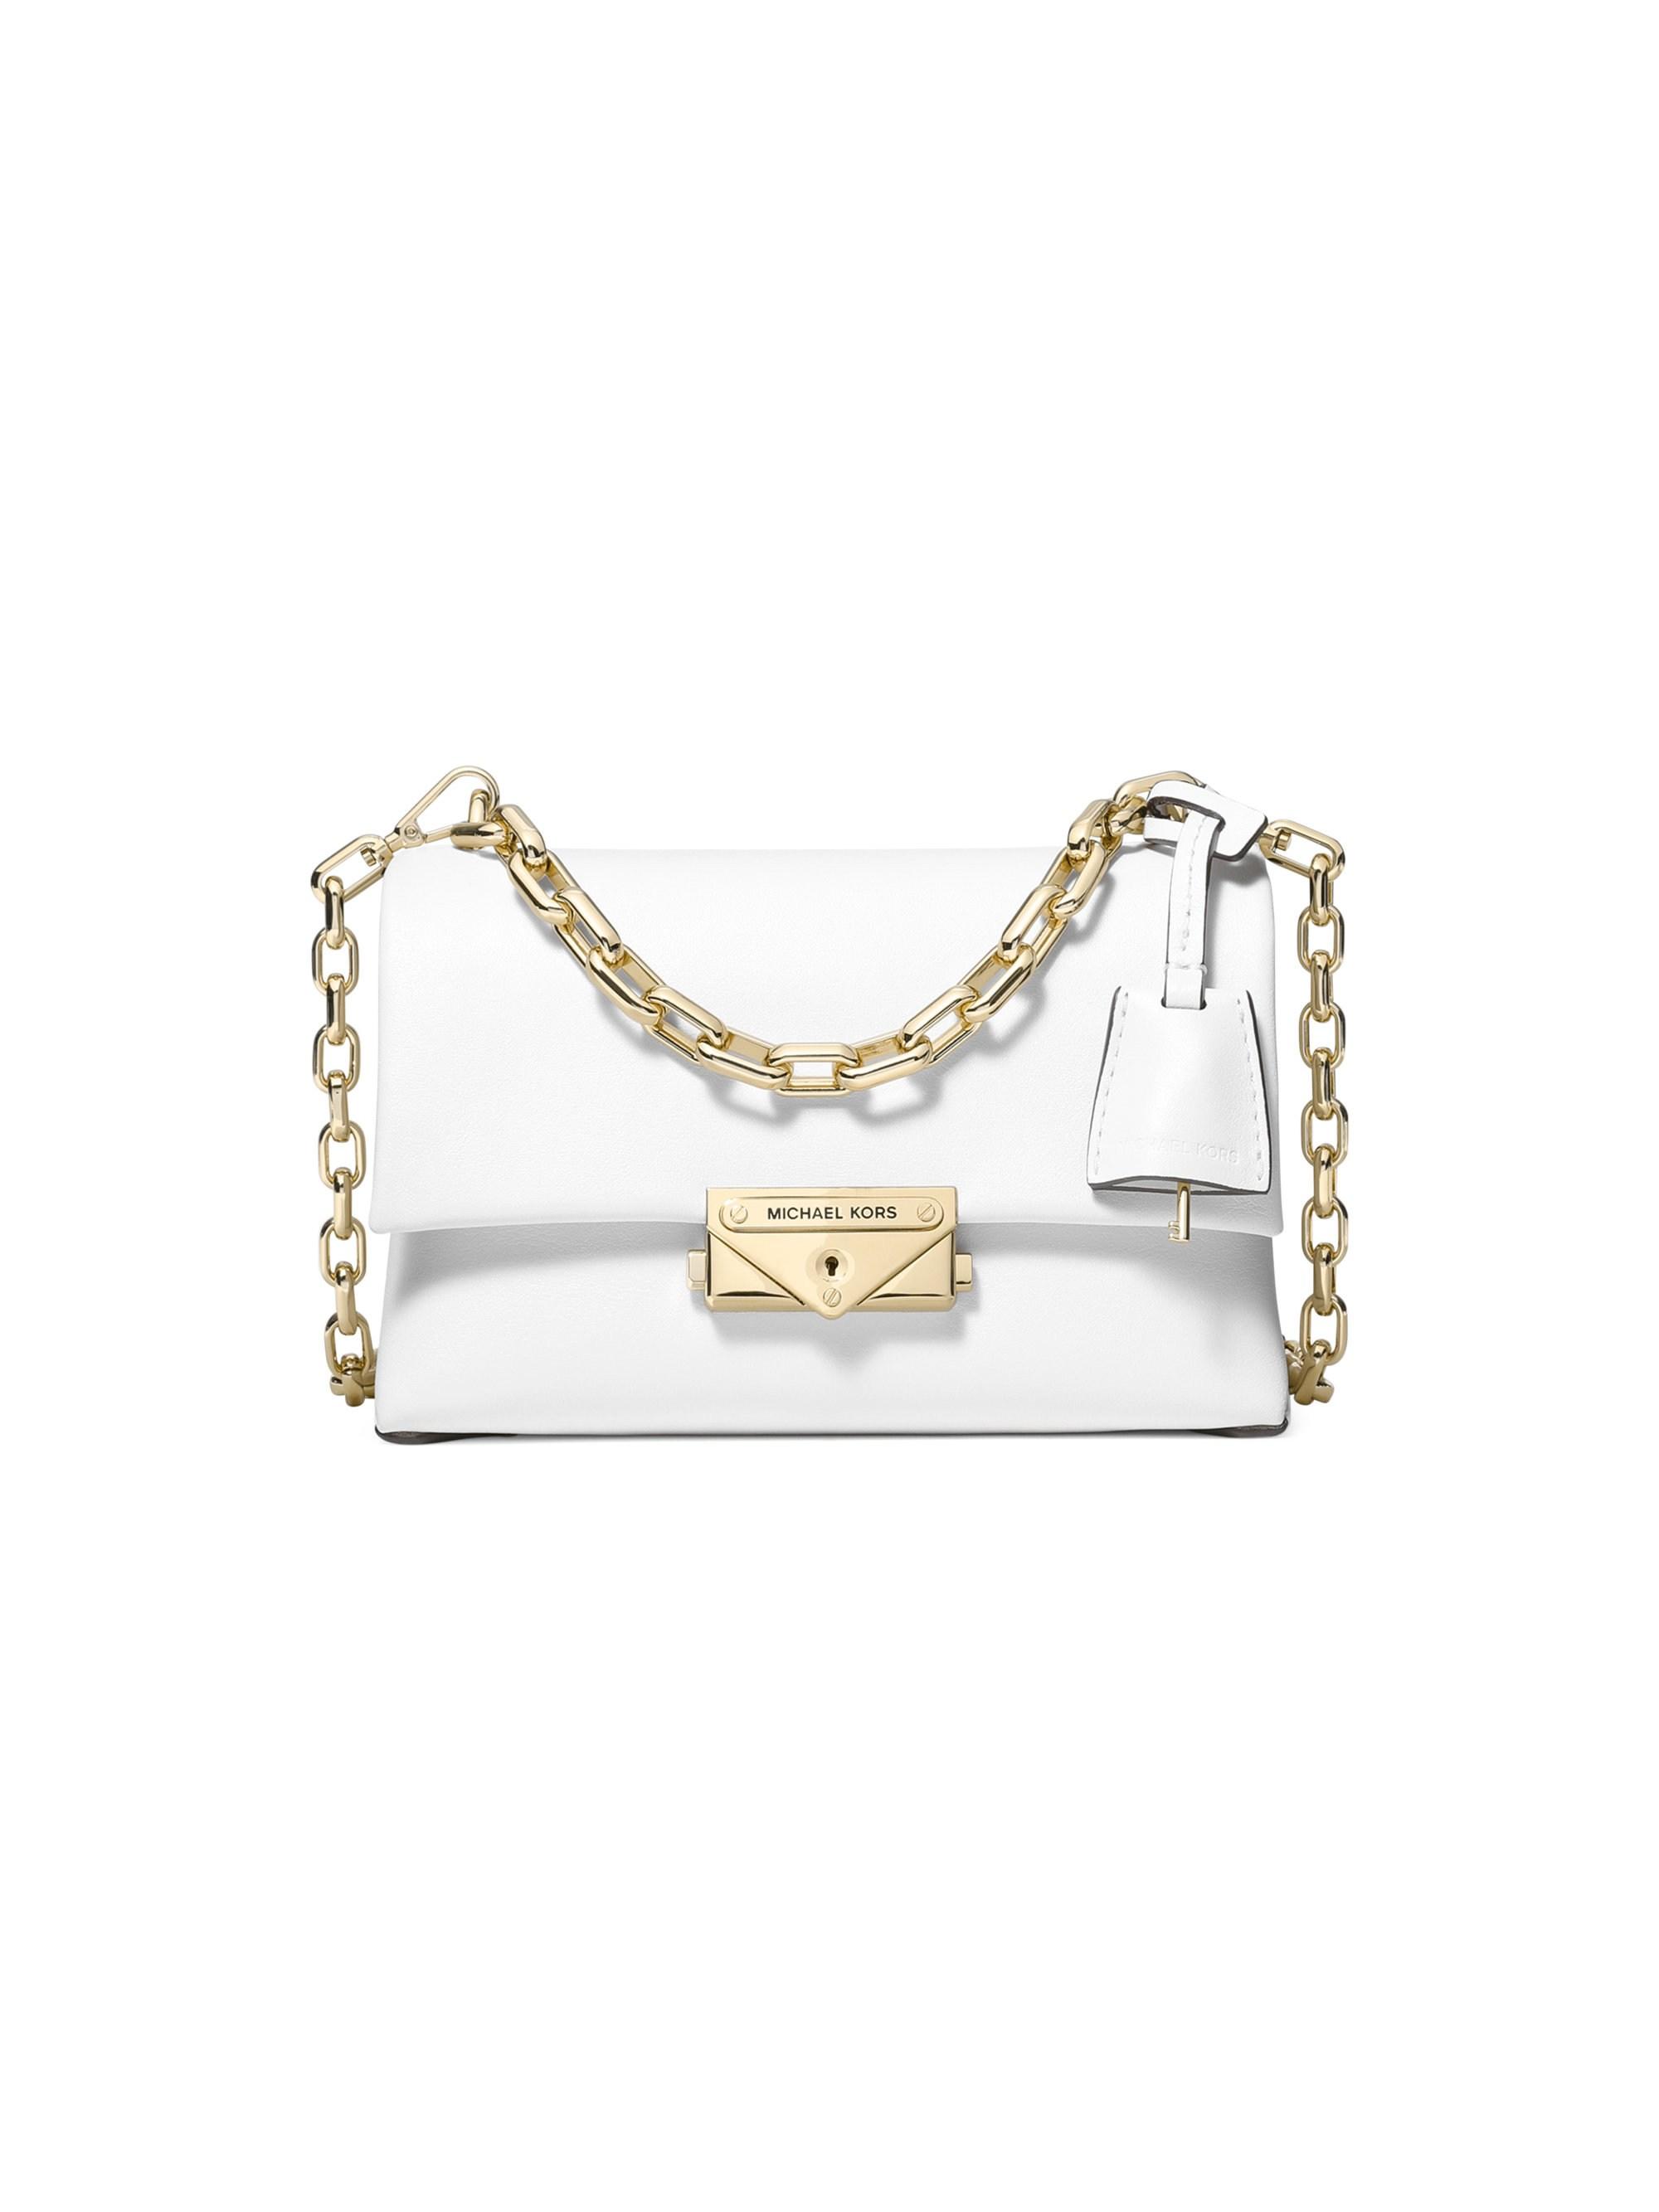 Michael Kors Extra-small Cece Chain Leather Crossbody Bag in White - Lyst